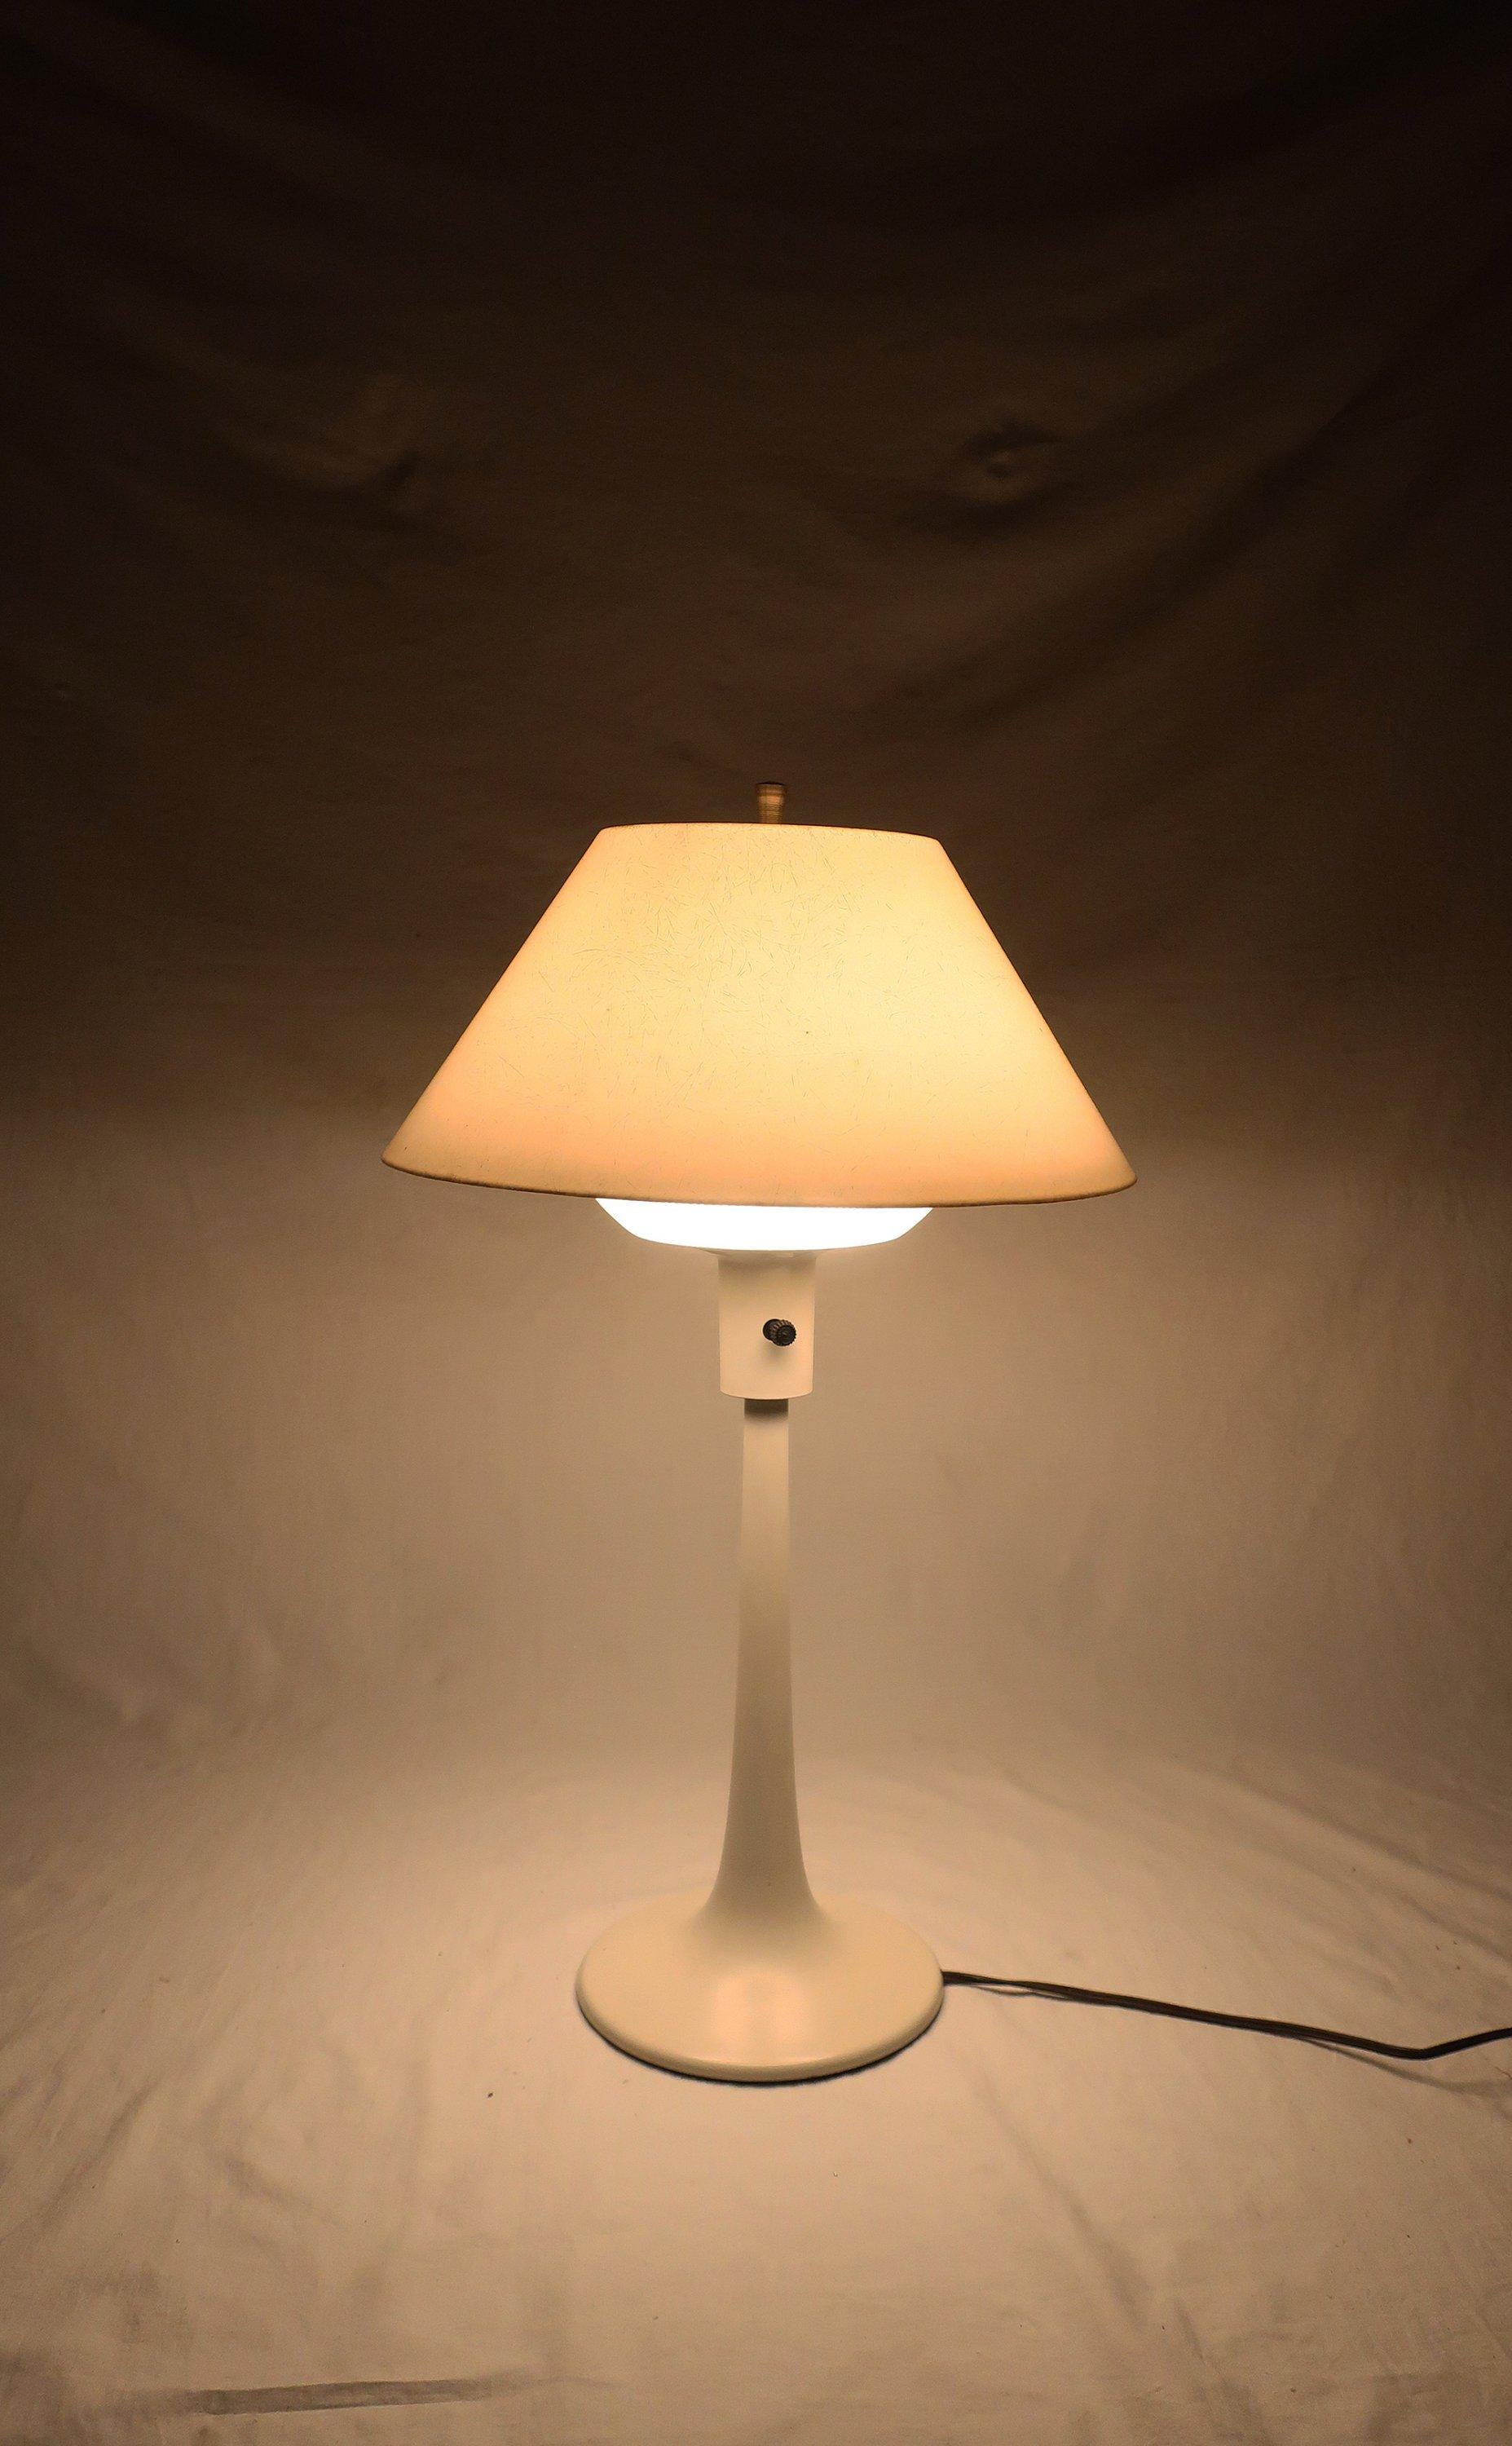 Mid-20th Century Vintage Tulip Table Lamp by Gerald Thurston for Lightolier